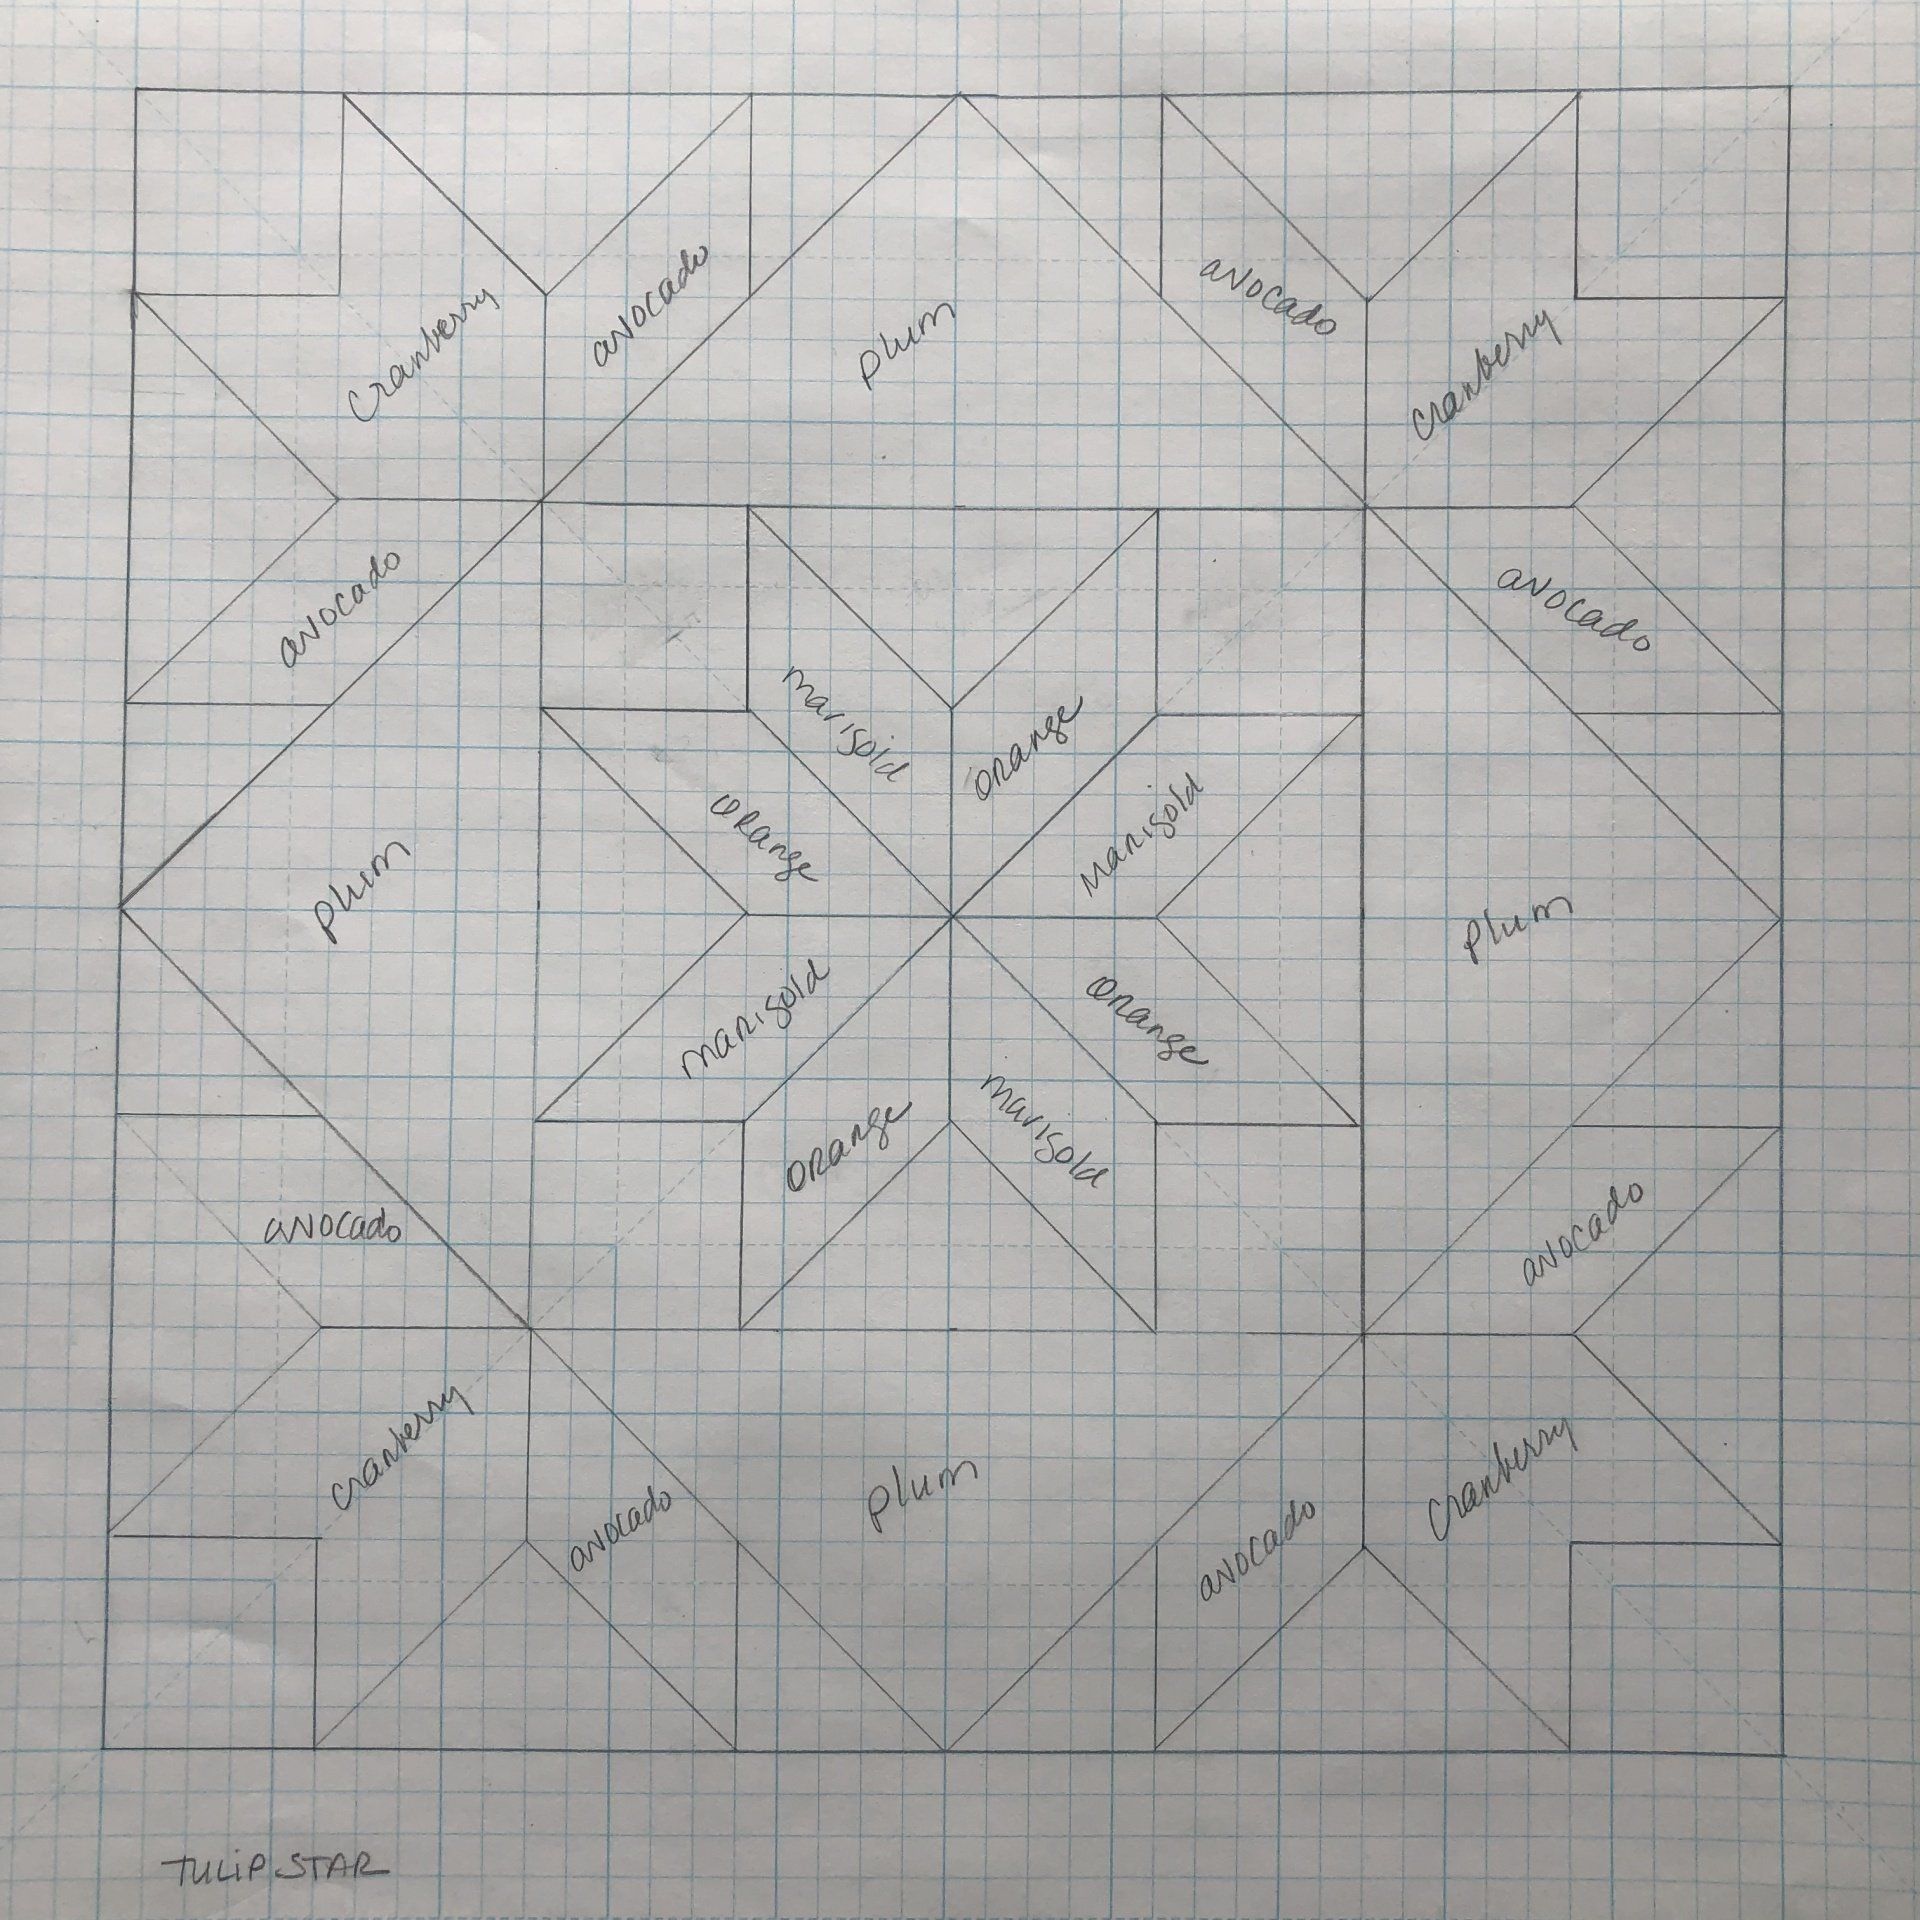 A draft of a barn quilt design on graph paper.